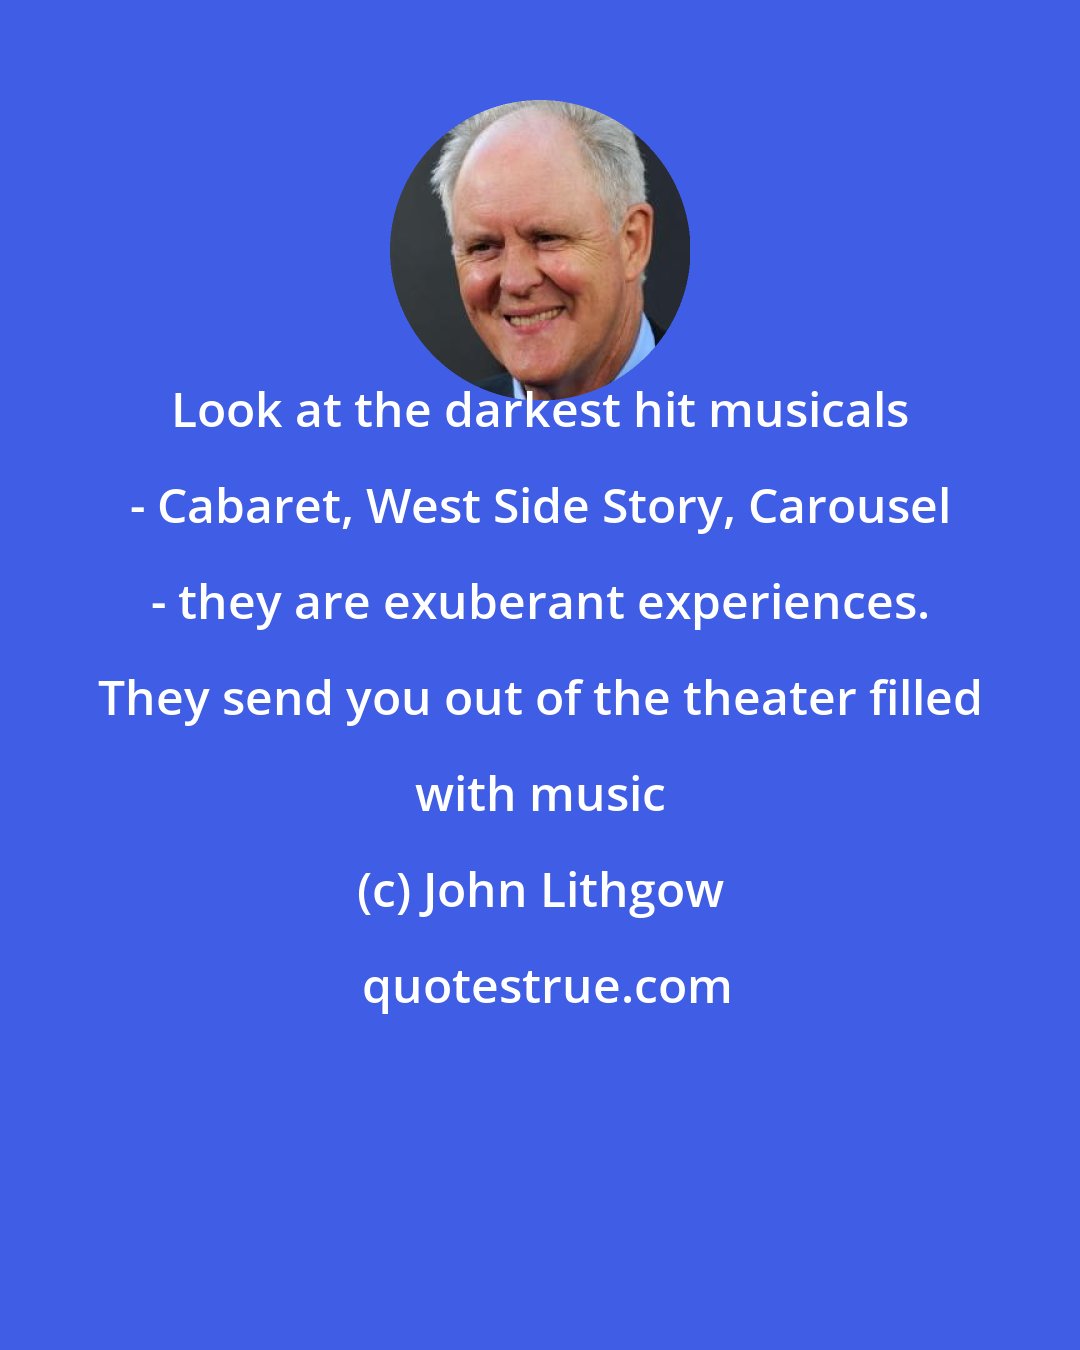 John Lithgow: Look at the darkest hit musicals - Cabaret, West Side Story, Carousel - they are exuberant experiences. They send you out of the theater filled with music